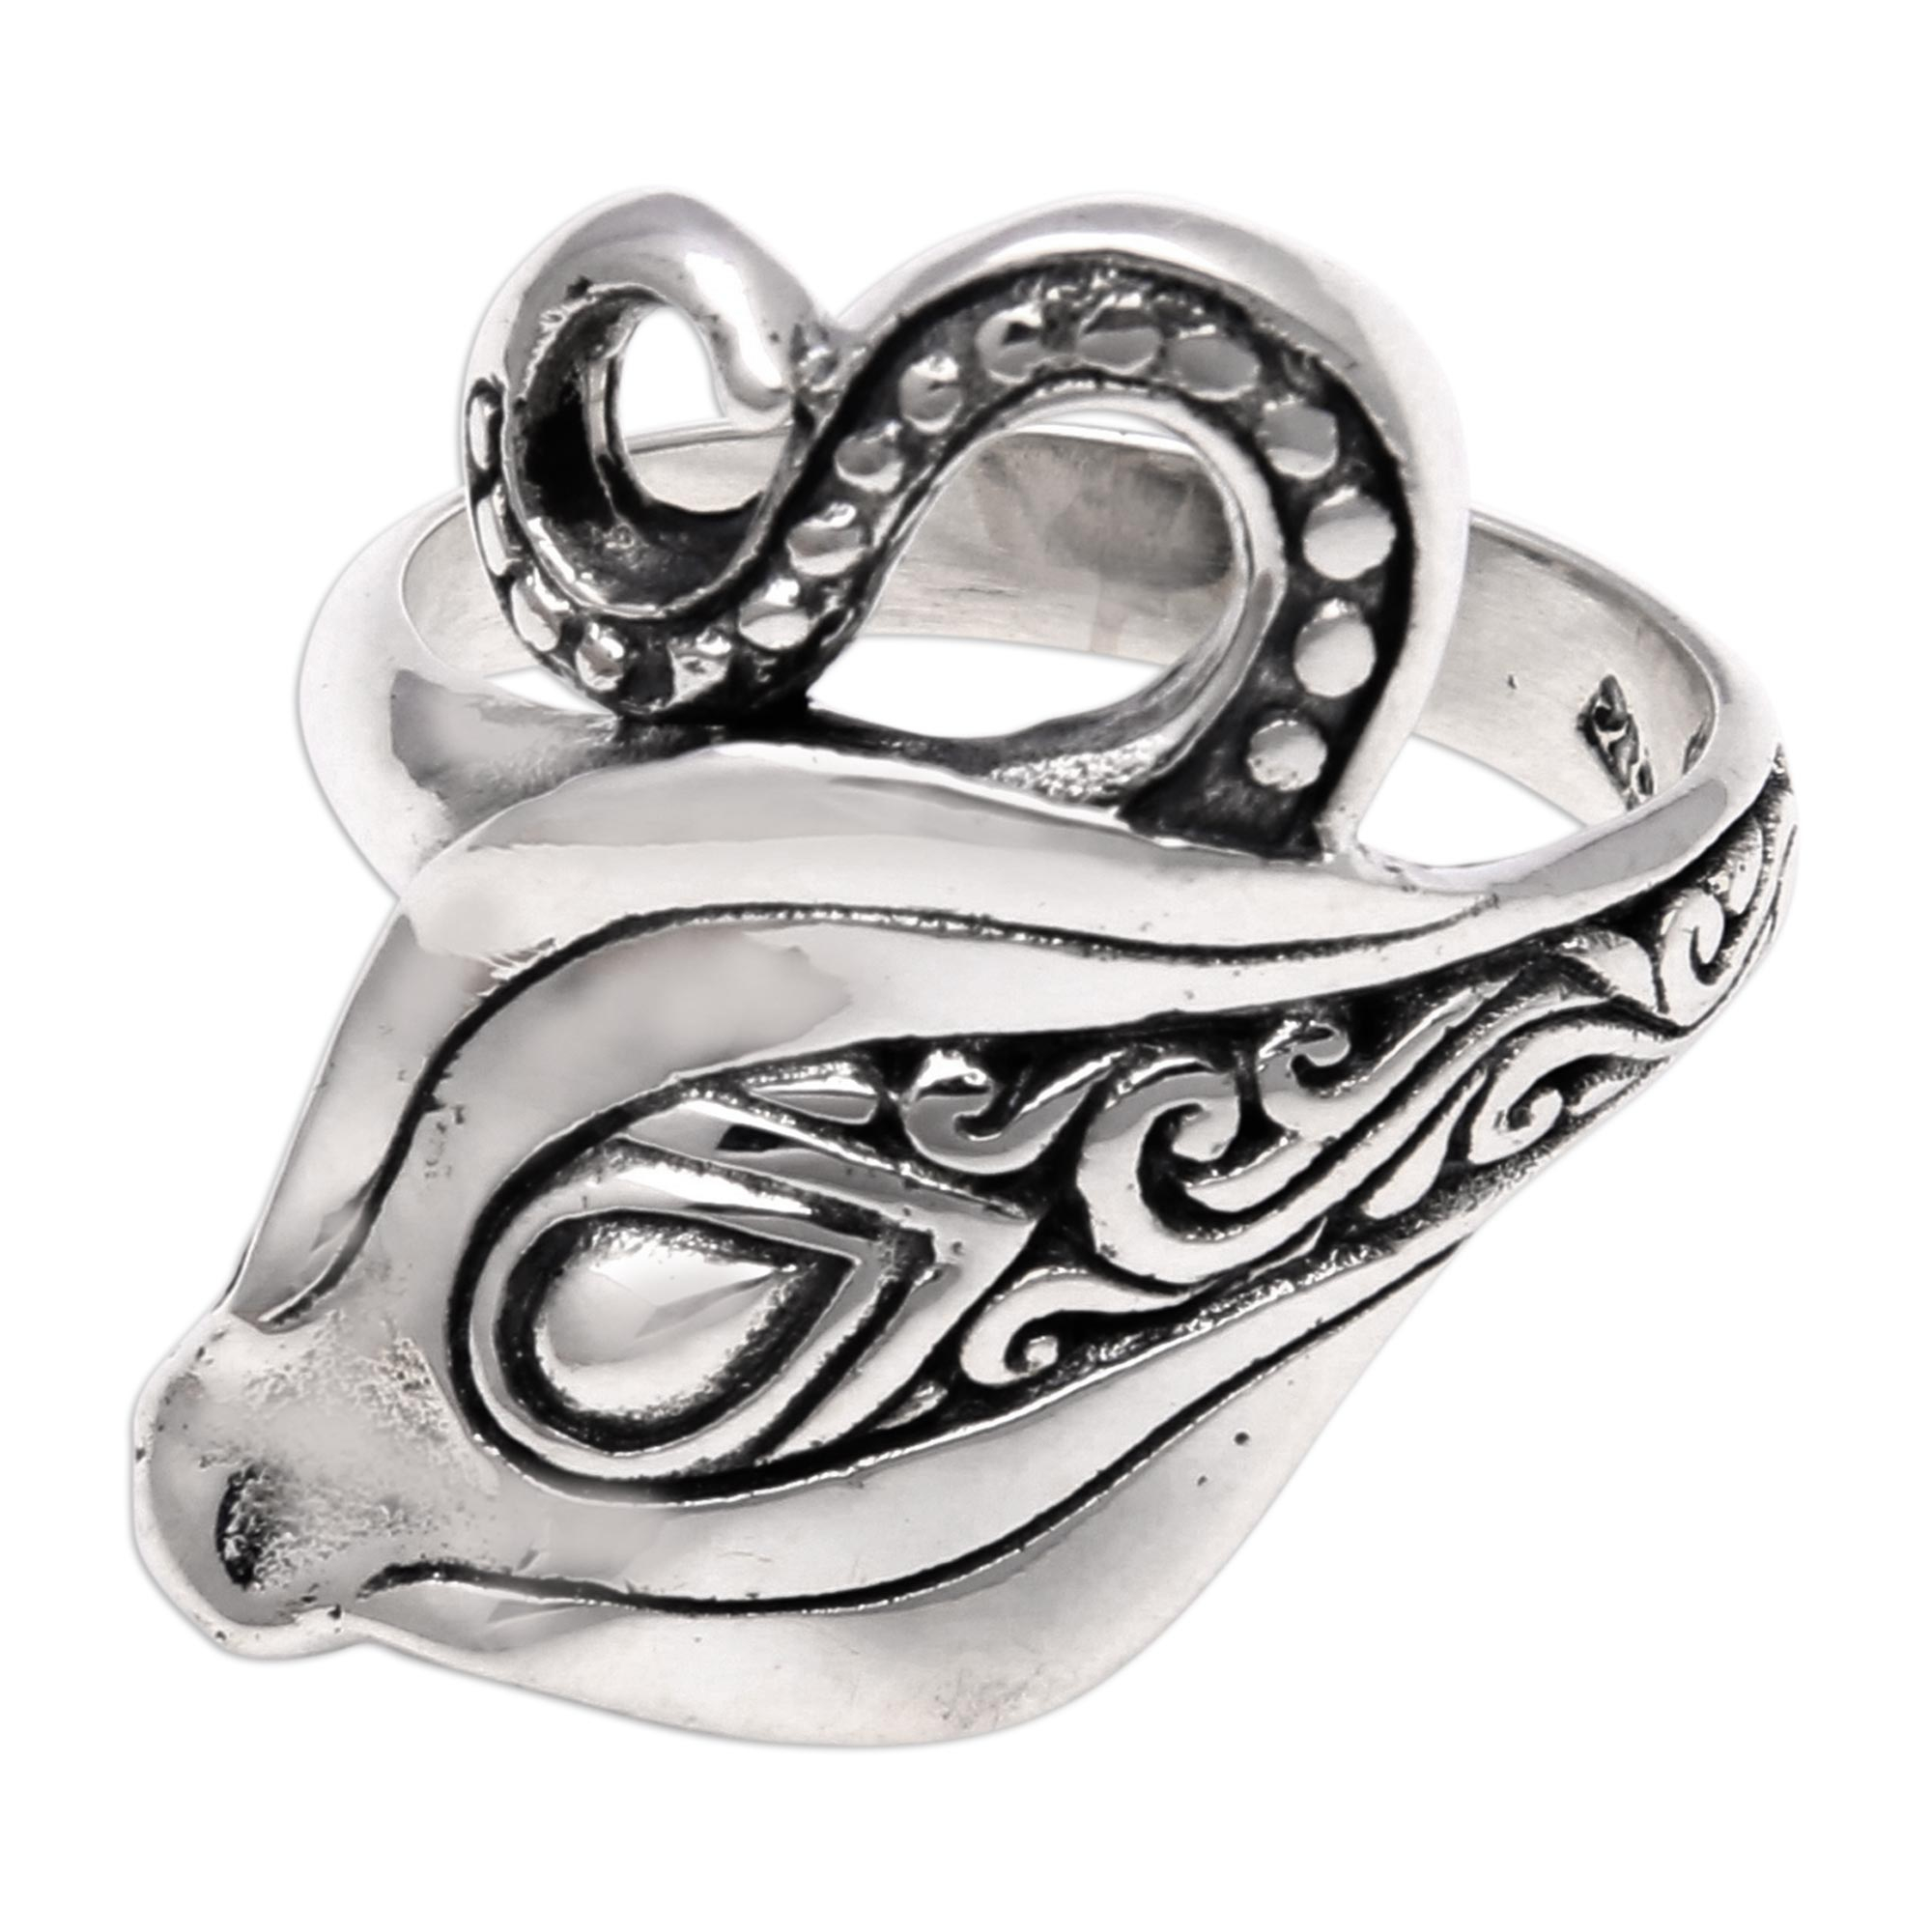 Sterling Silver King Cobra Cocktail Ring from Bali - Gleaming Cobra ...